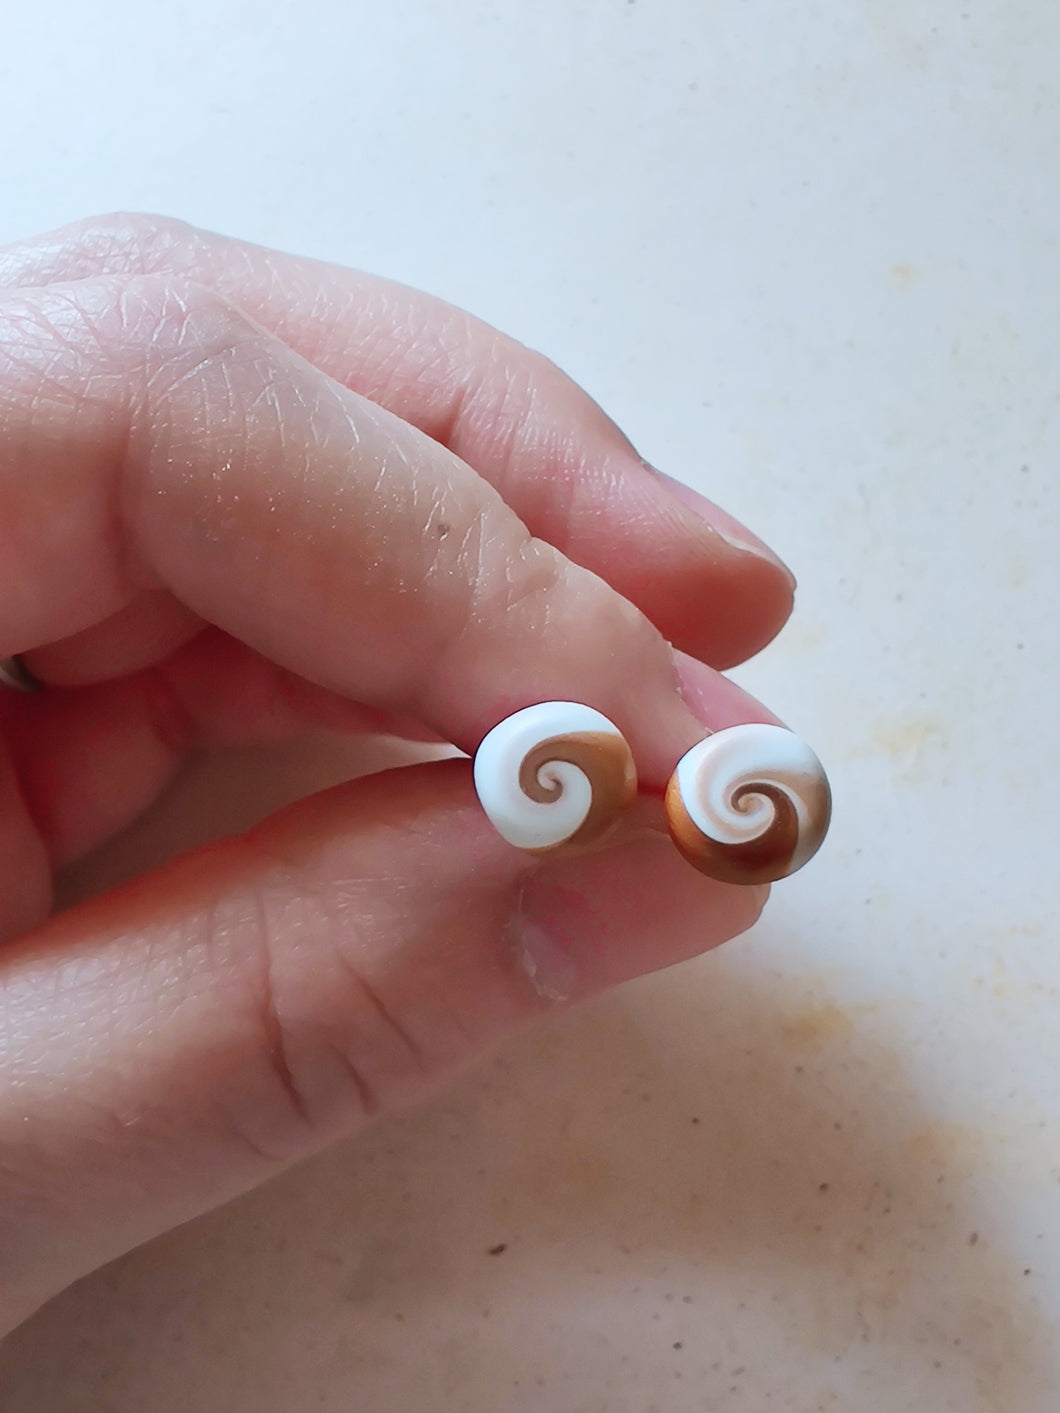 Gold and white swirl earrings held between finger and thumb